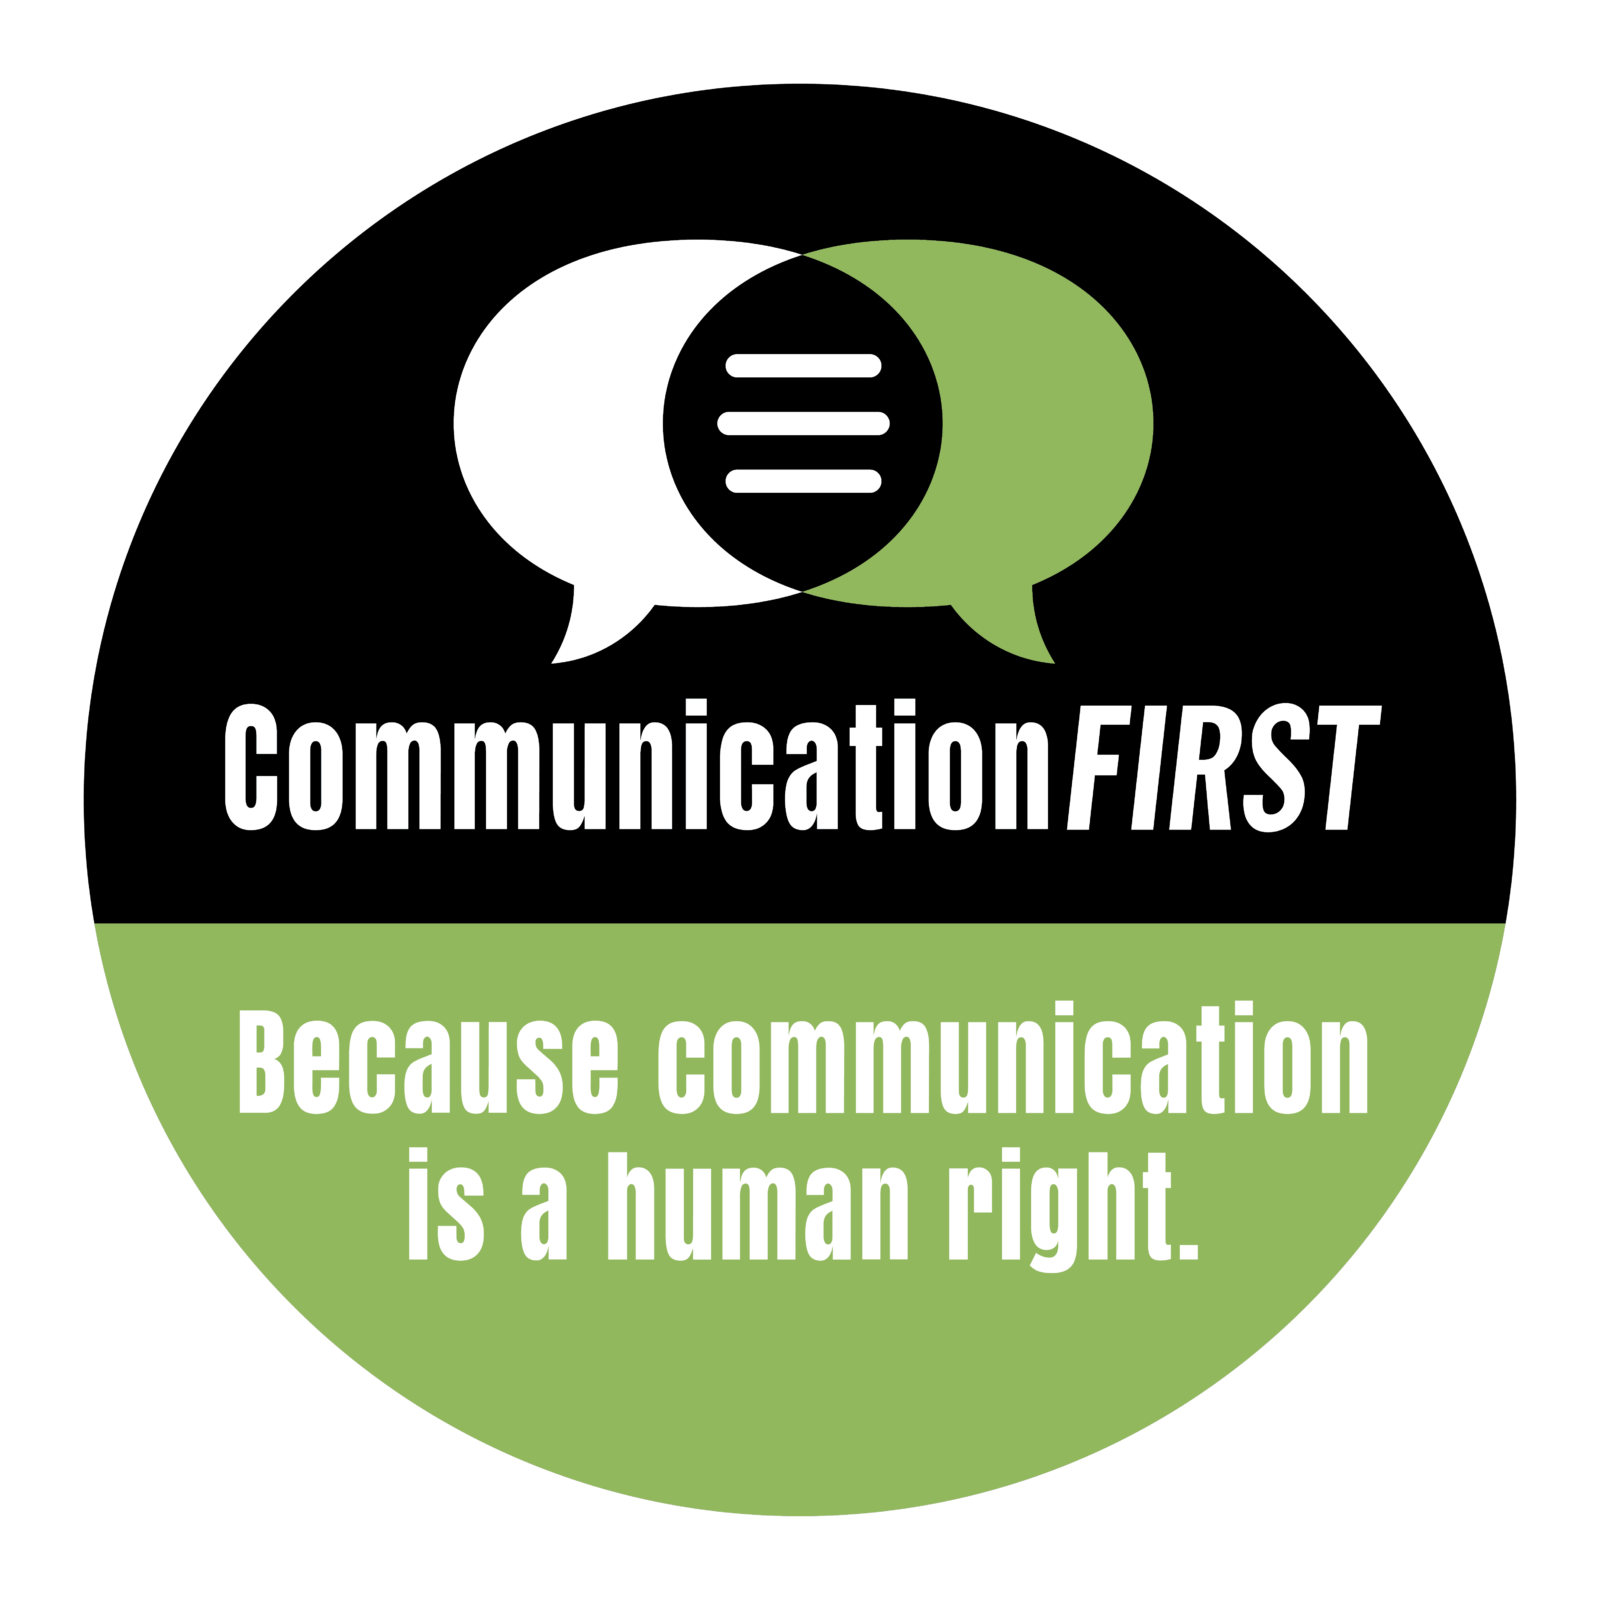 Round version of Communication FIRST logo. With tagline "Because communication is a human right."